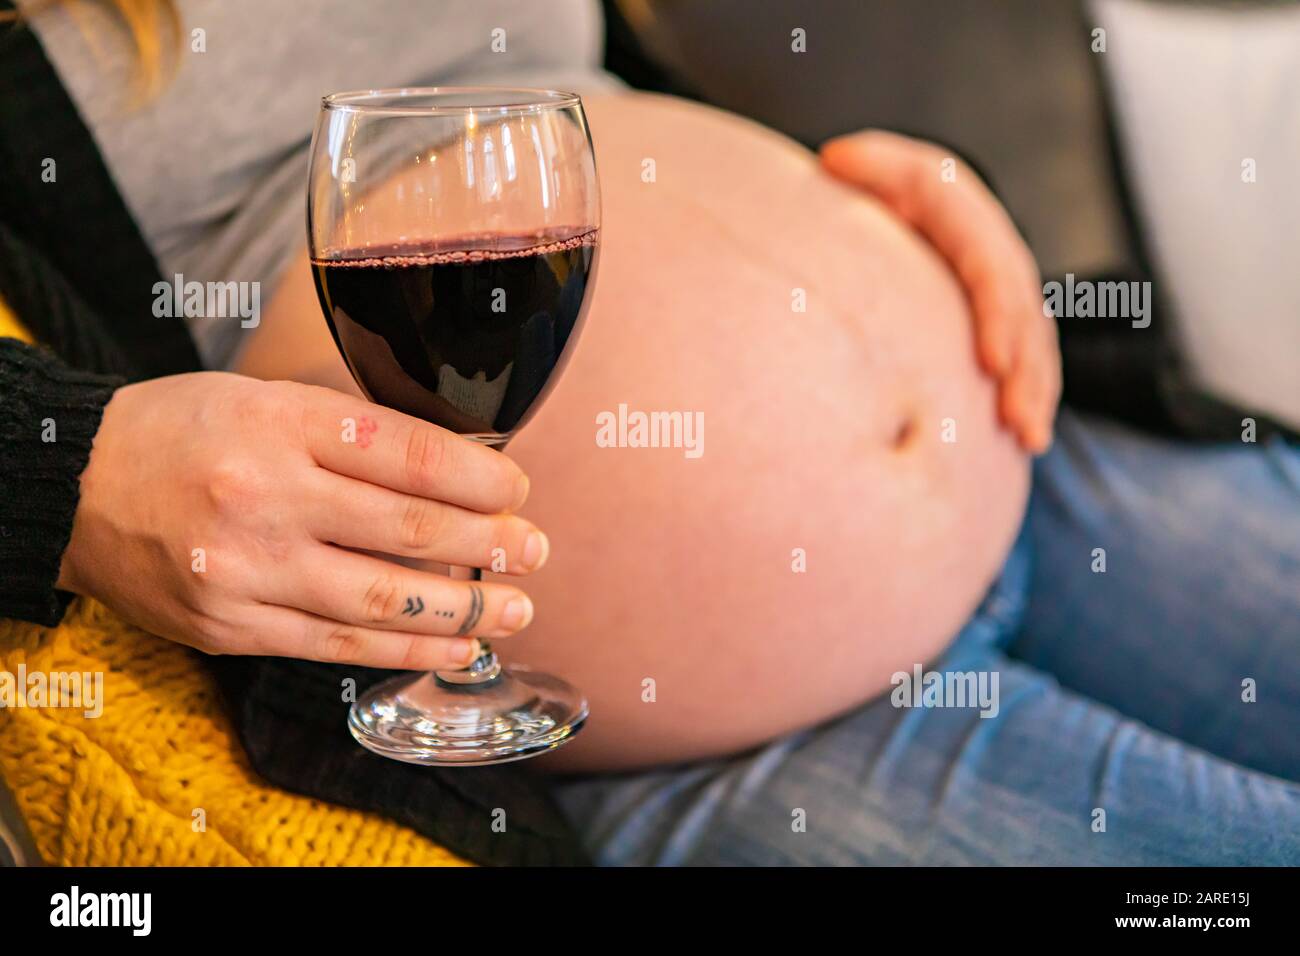 Closeup shot of a glass of red wine in hand of a woman in later stages of pregnancy, with swollen baby bump blurry in background, risk to unborn child Stock Photo